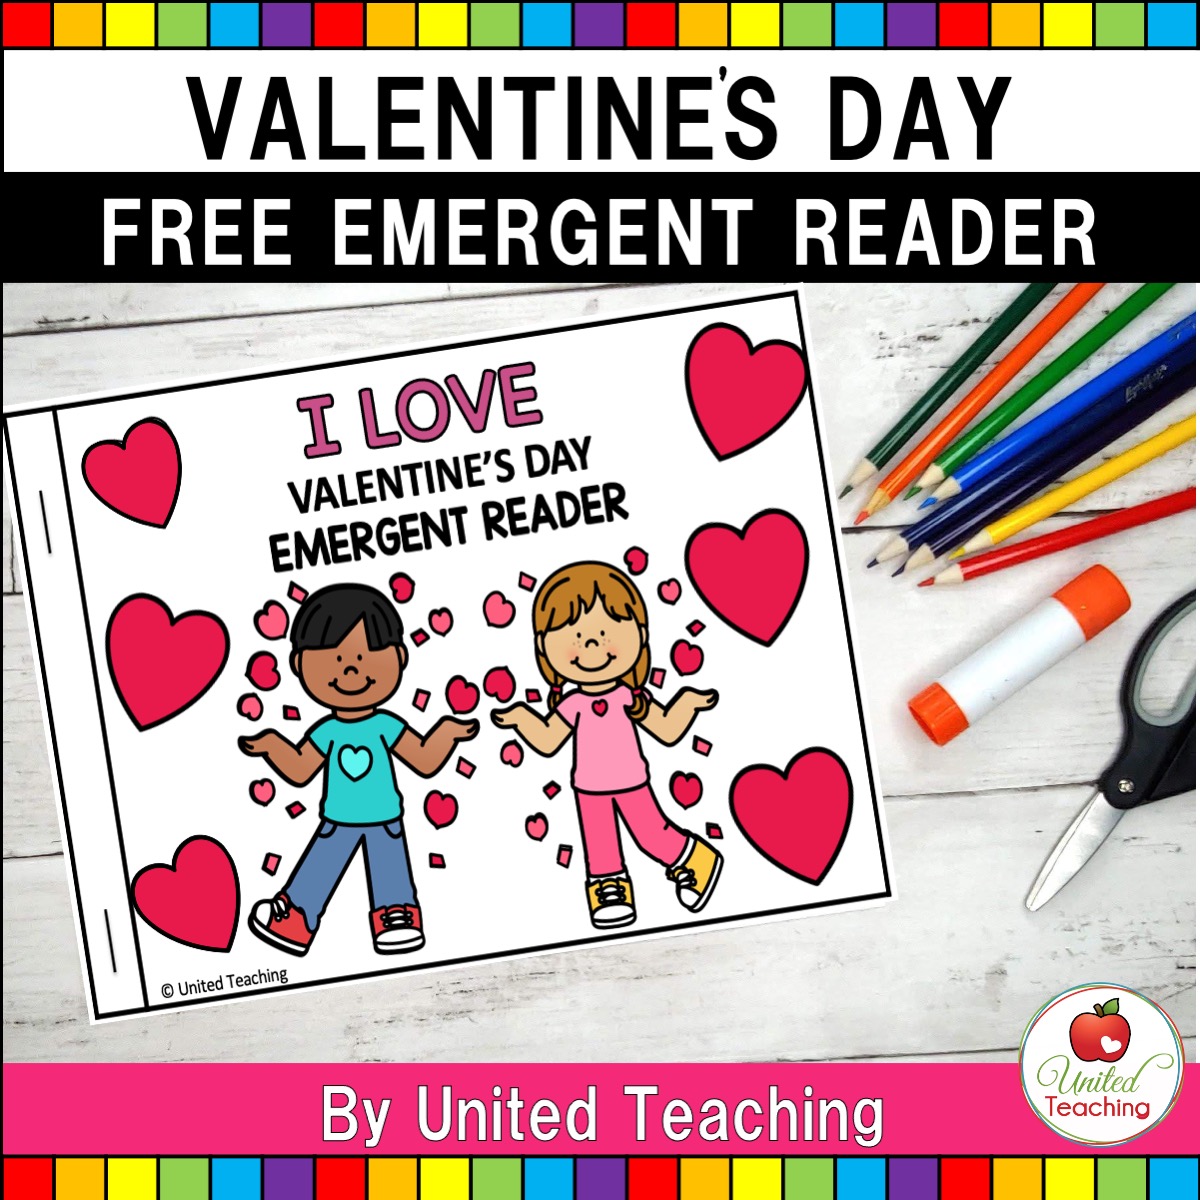 Valentine's Day Who Do You Love? Free Emergent Reader